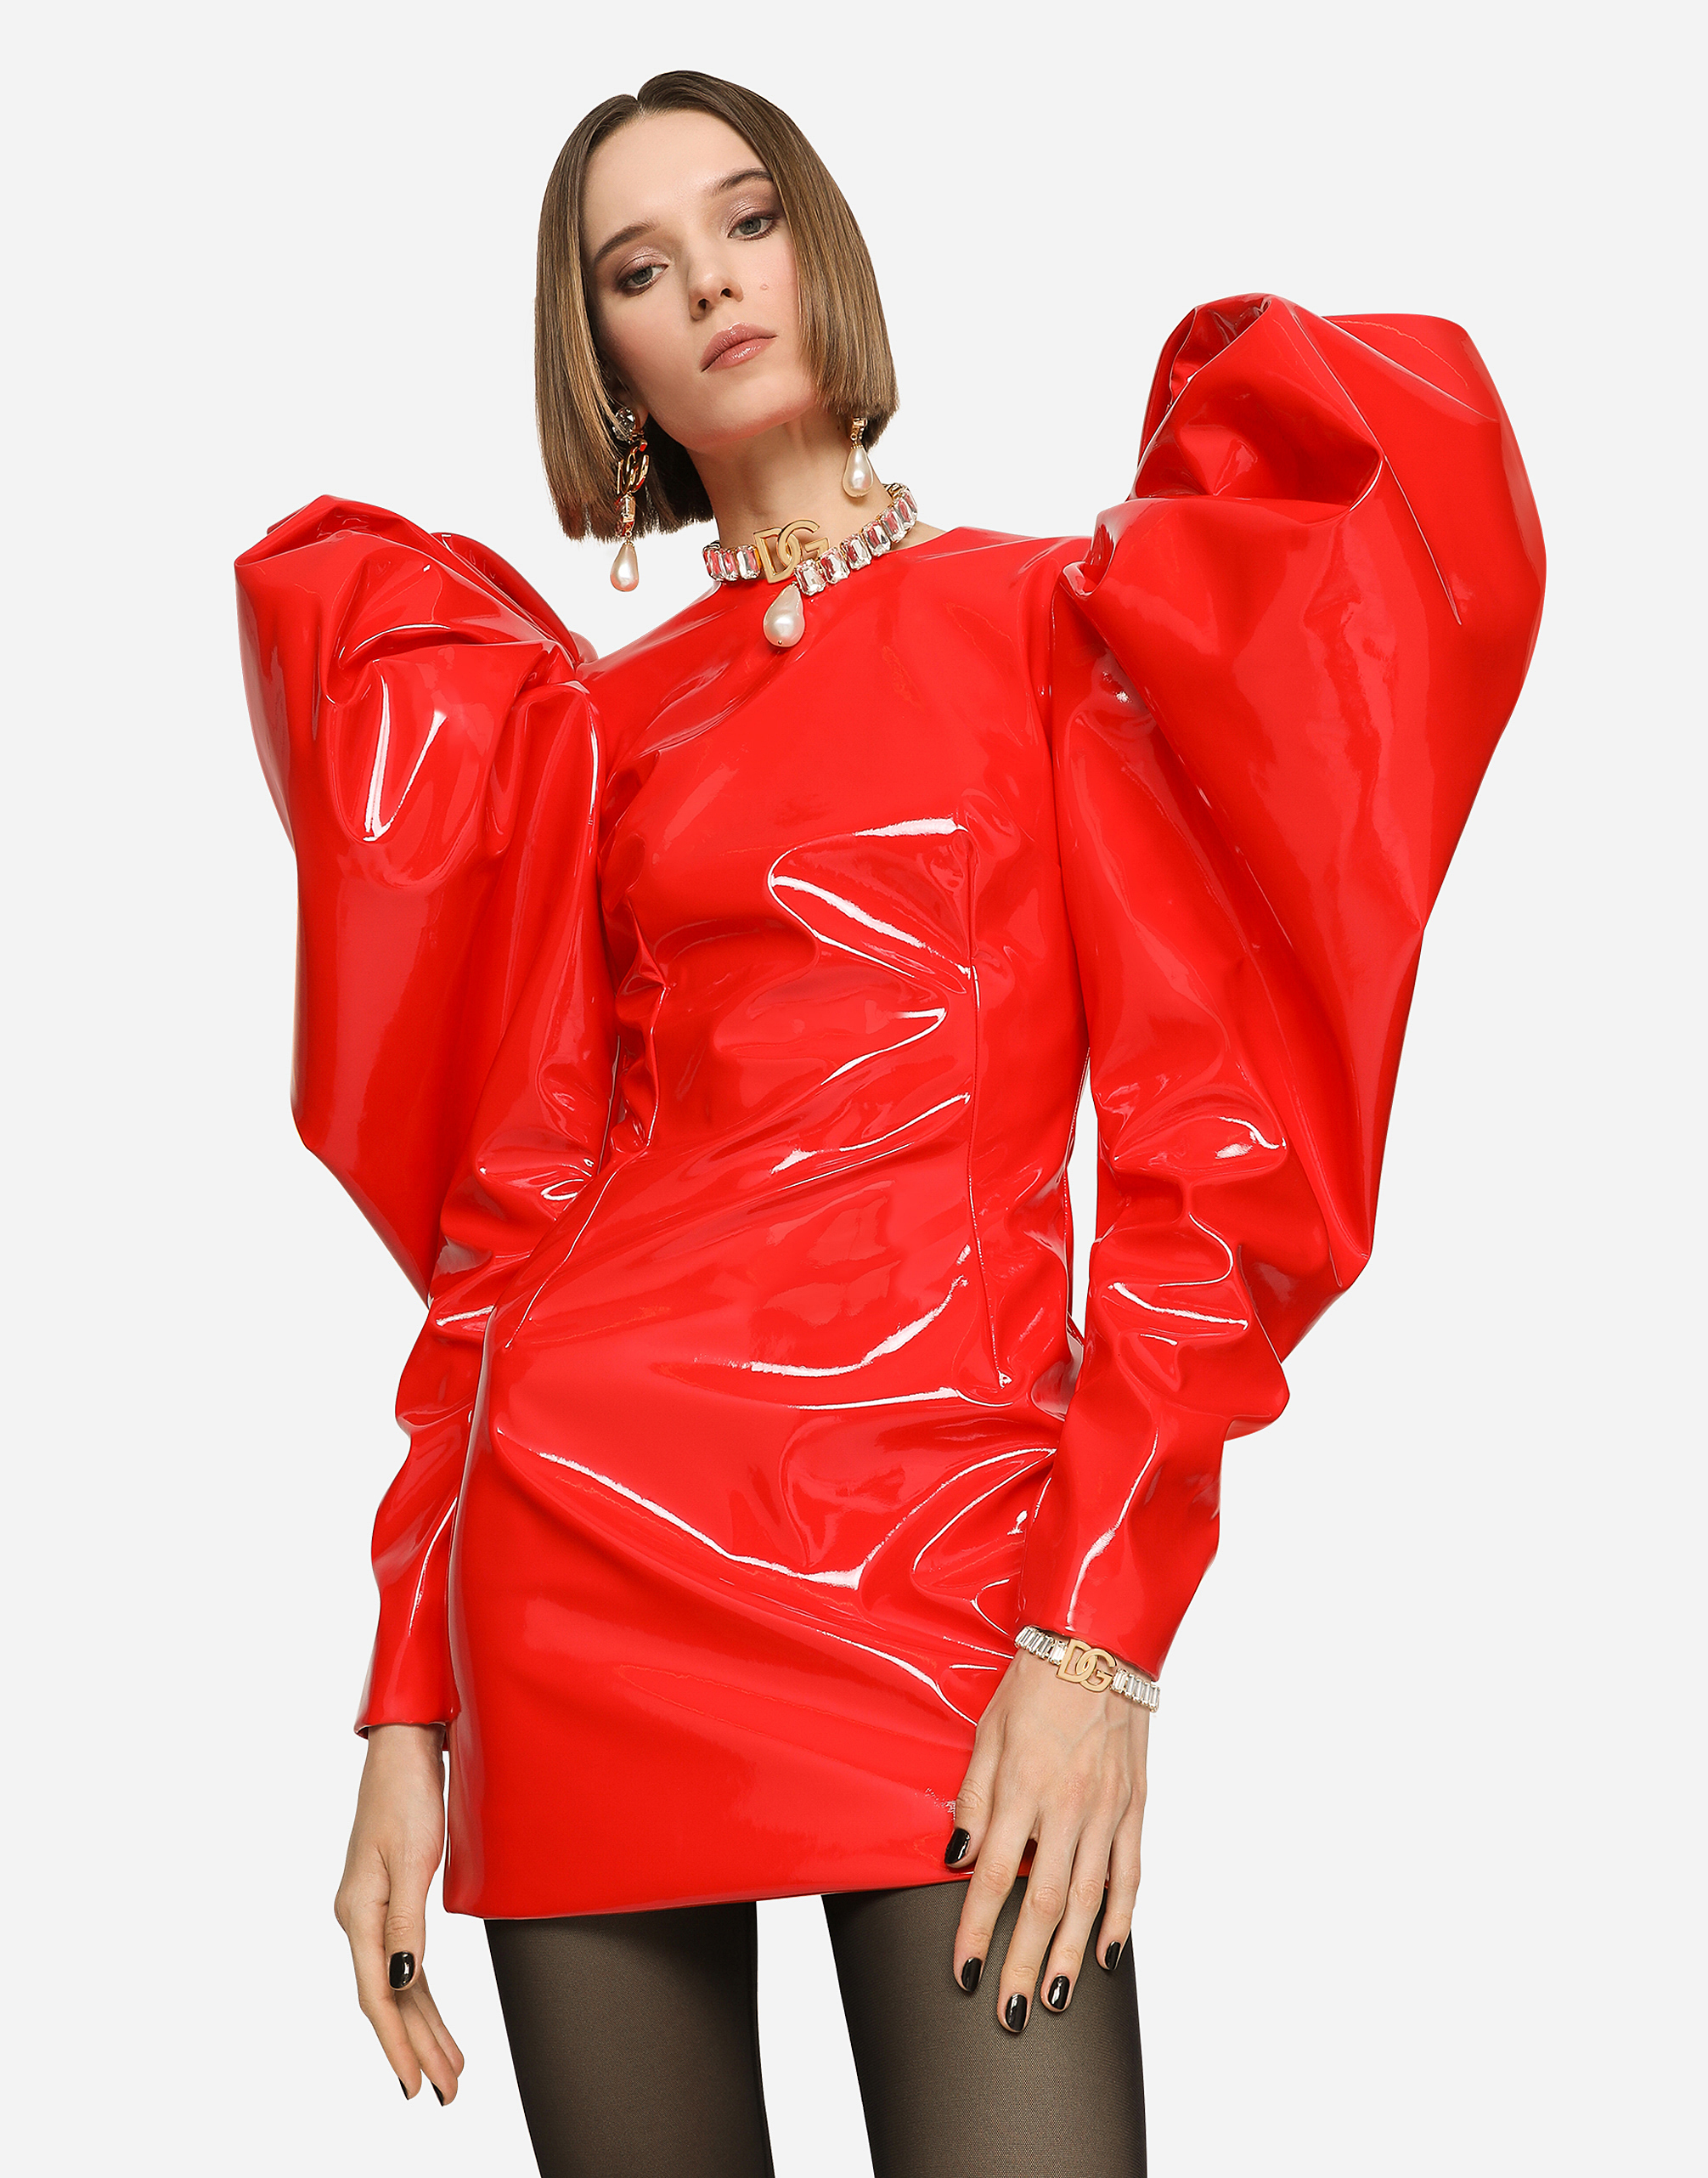 Short patent leather dress with butterfly sleeves in Red